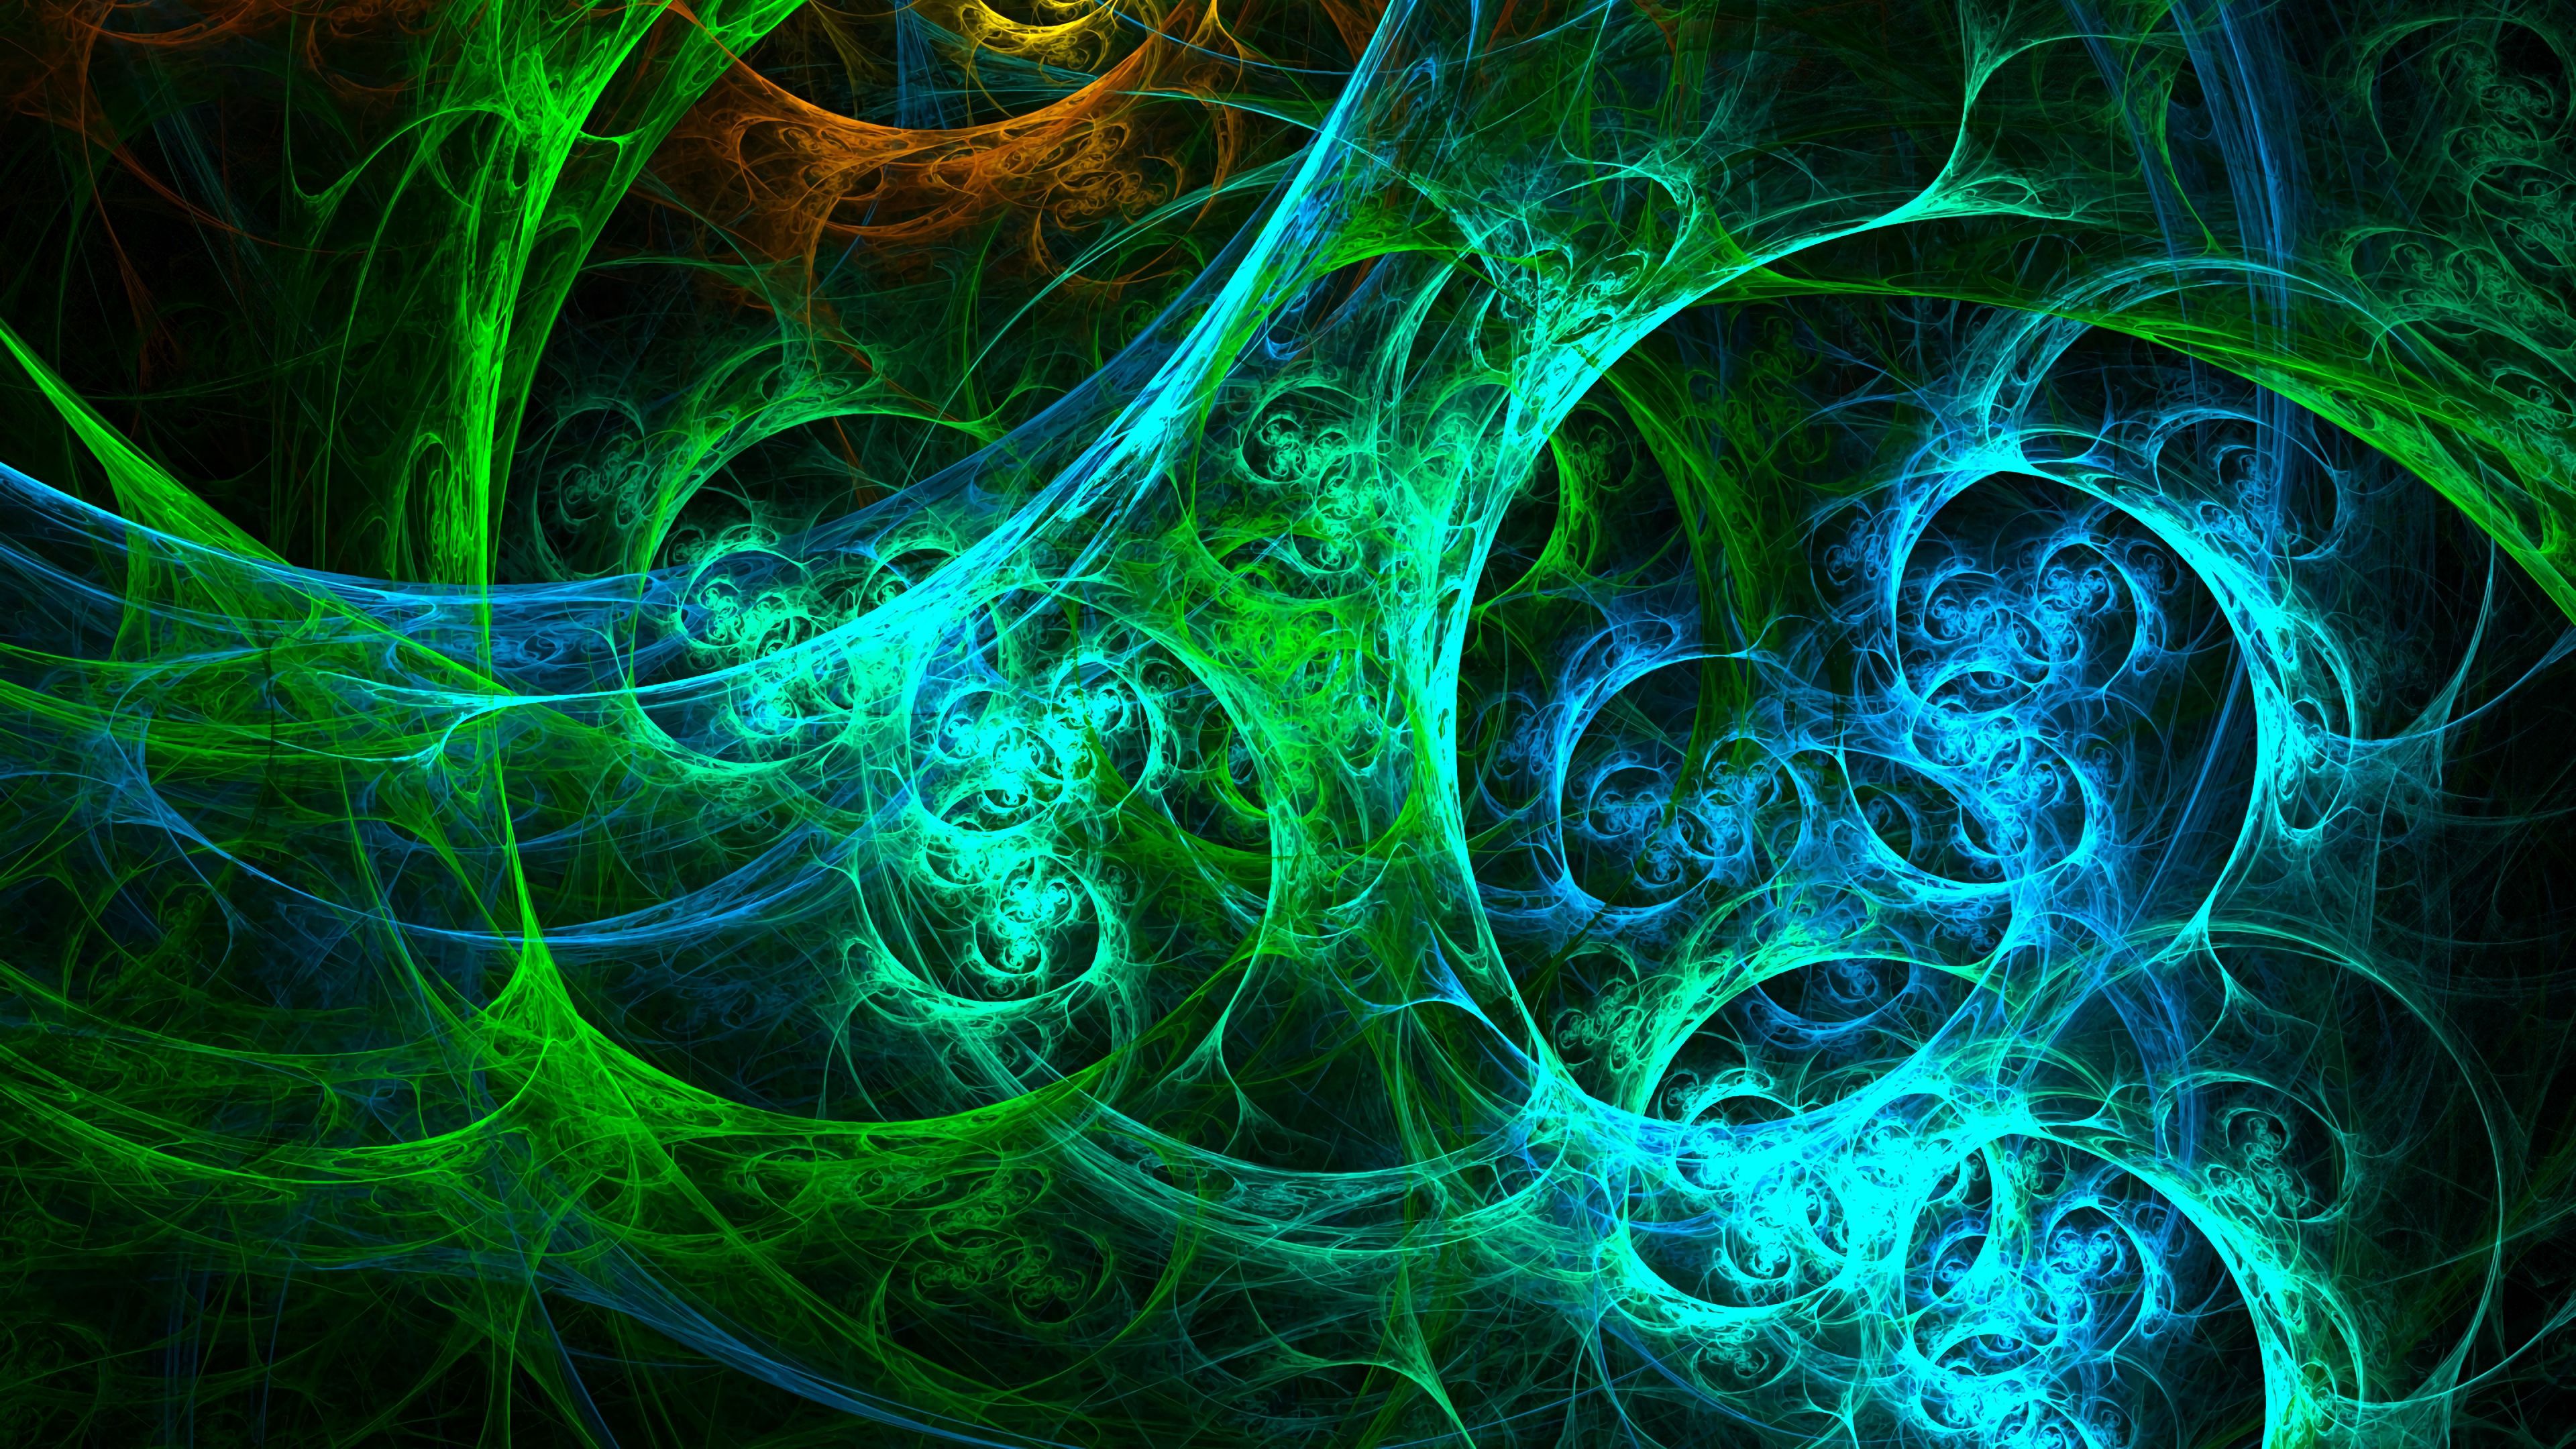 Download wallpaper 3840x2160 fractal, glow, colorful, tangled ...